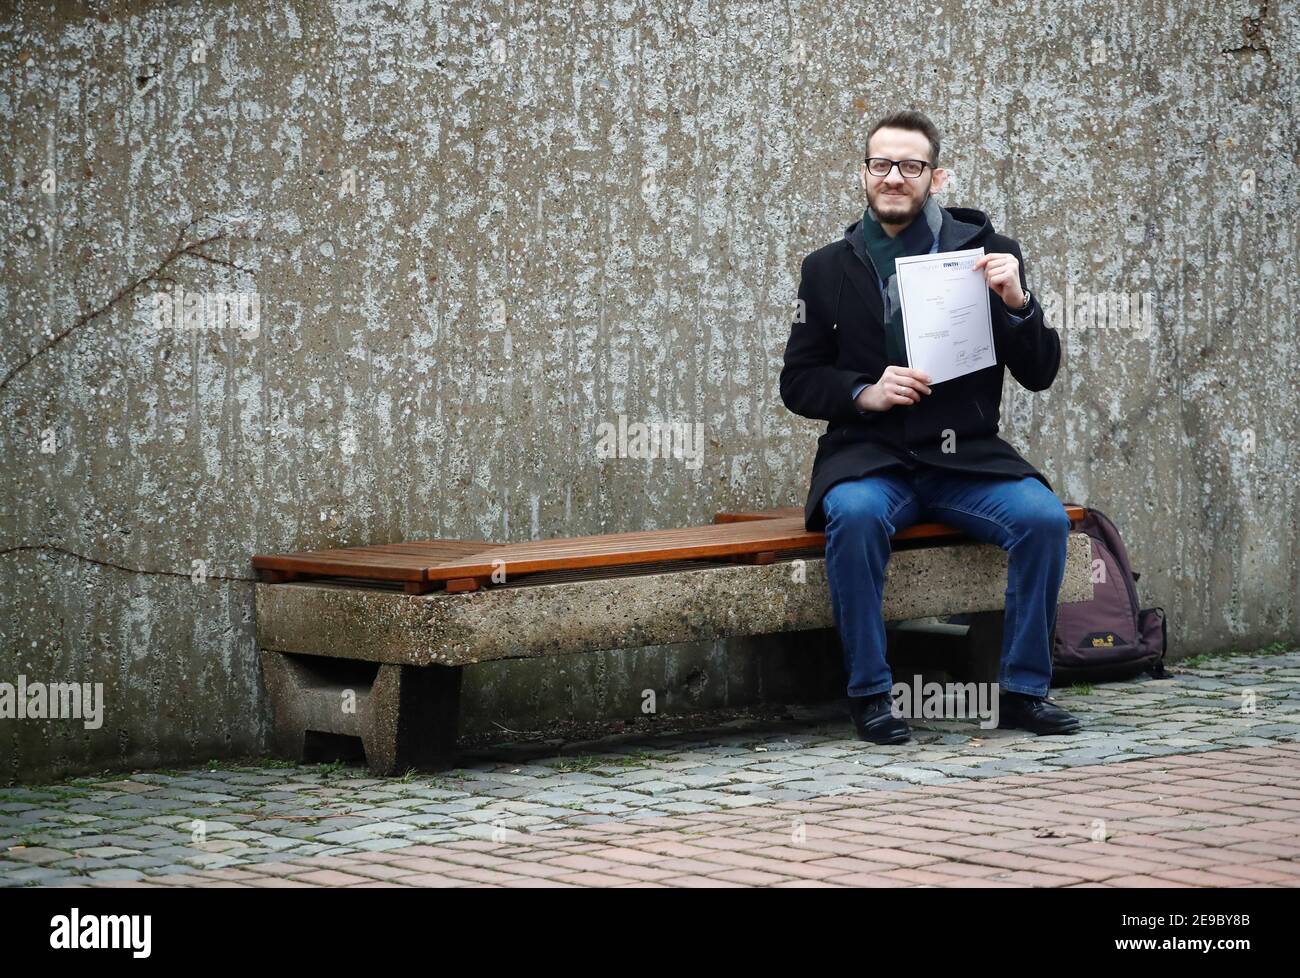 Syrian Abdul Kader Tizini who graduated with a master's degree in mechanical  engineering from RWTH Aachen, holds a copy of his master certificate as he  sits on a bench at the campus